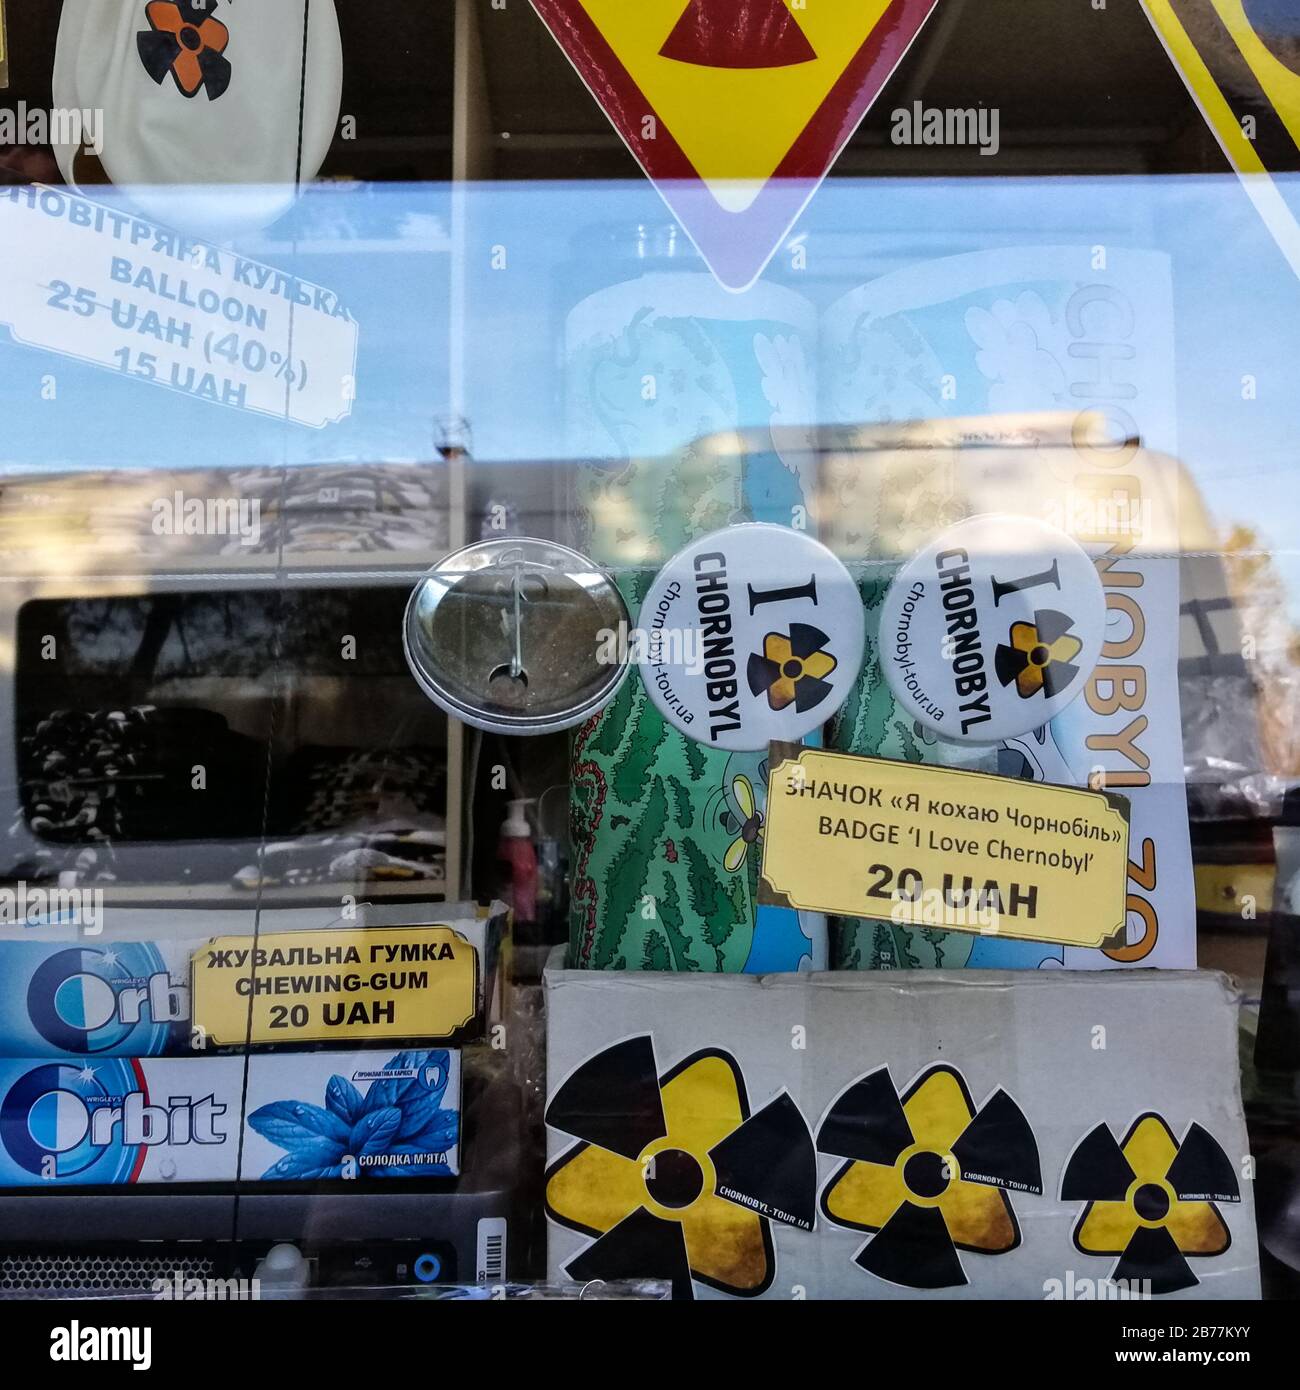 Radioactivity themed souvenirs behind glass at the border of the Chernobyl exclusion zone in Ukraine. Stock Photo